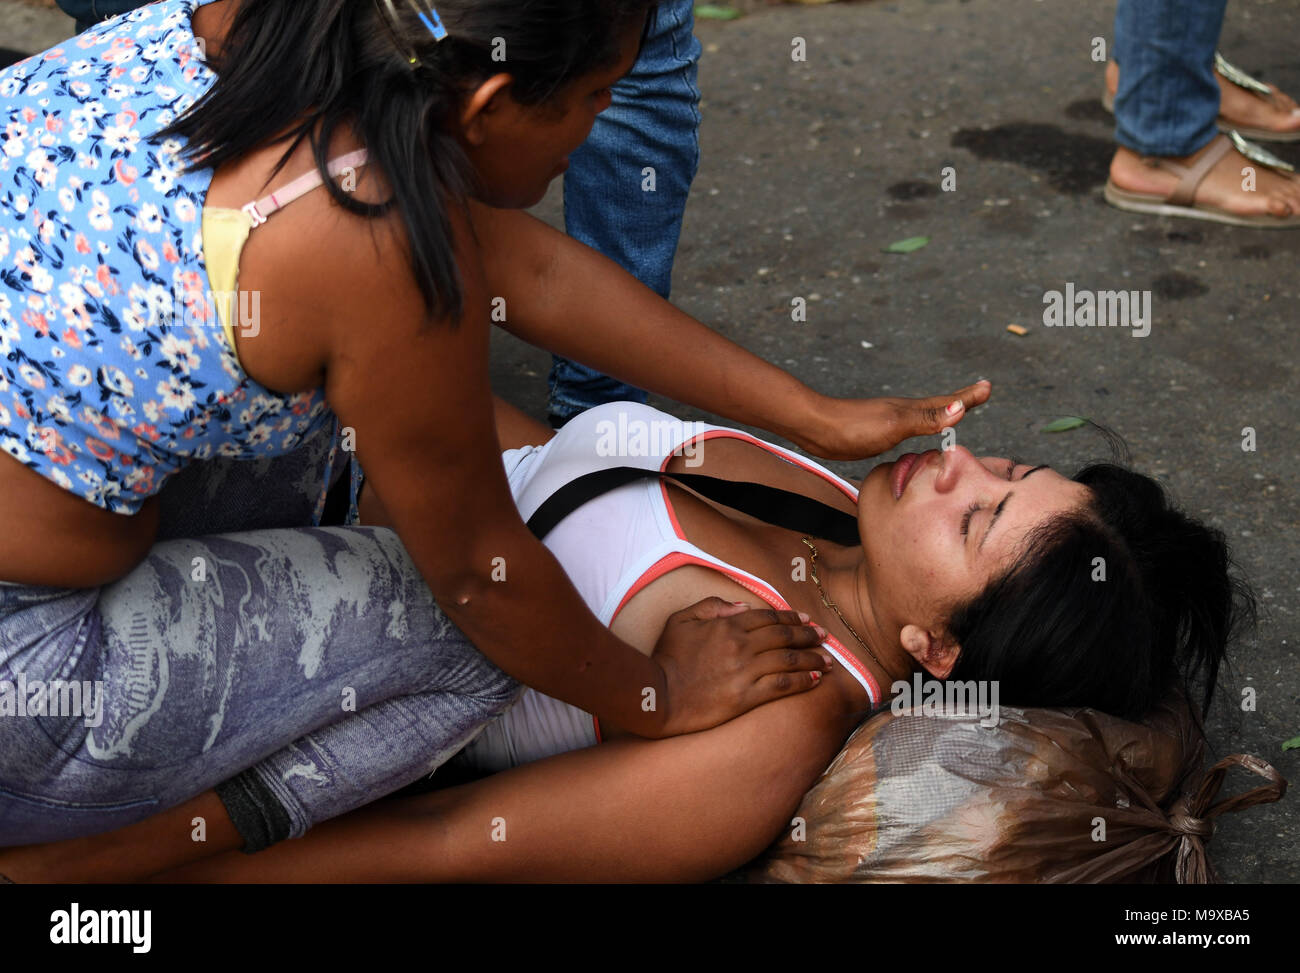 Carabobo, Venezuela. 28th Mar, 2018. A woman faints as relatives wait for information after an alleged fire at a Venezuelan police station, in Valencia, Carabobo state, Venezuela, on March 28, 2018. A prison riot and fire has broken out at a Venezuelan police station in the central city of Valencia and at least 68 people were killed, Venezuelan officials said Wednesday. Credit: Roman Camacho/SOPA/ZUMAPRESS/Xinhua/Alamy Live News Stock Photo